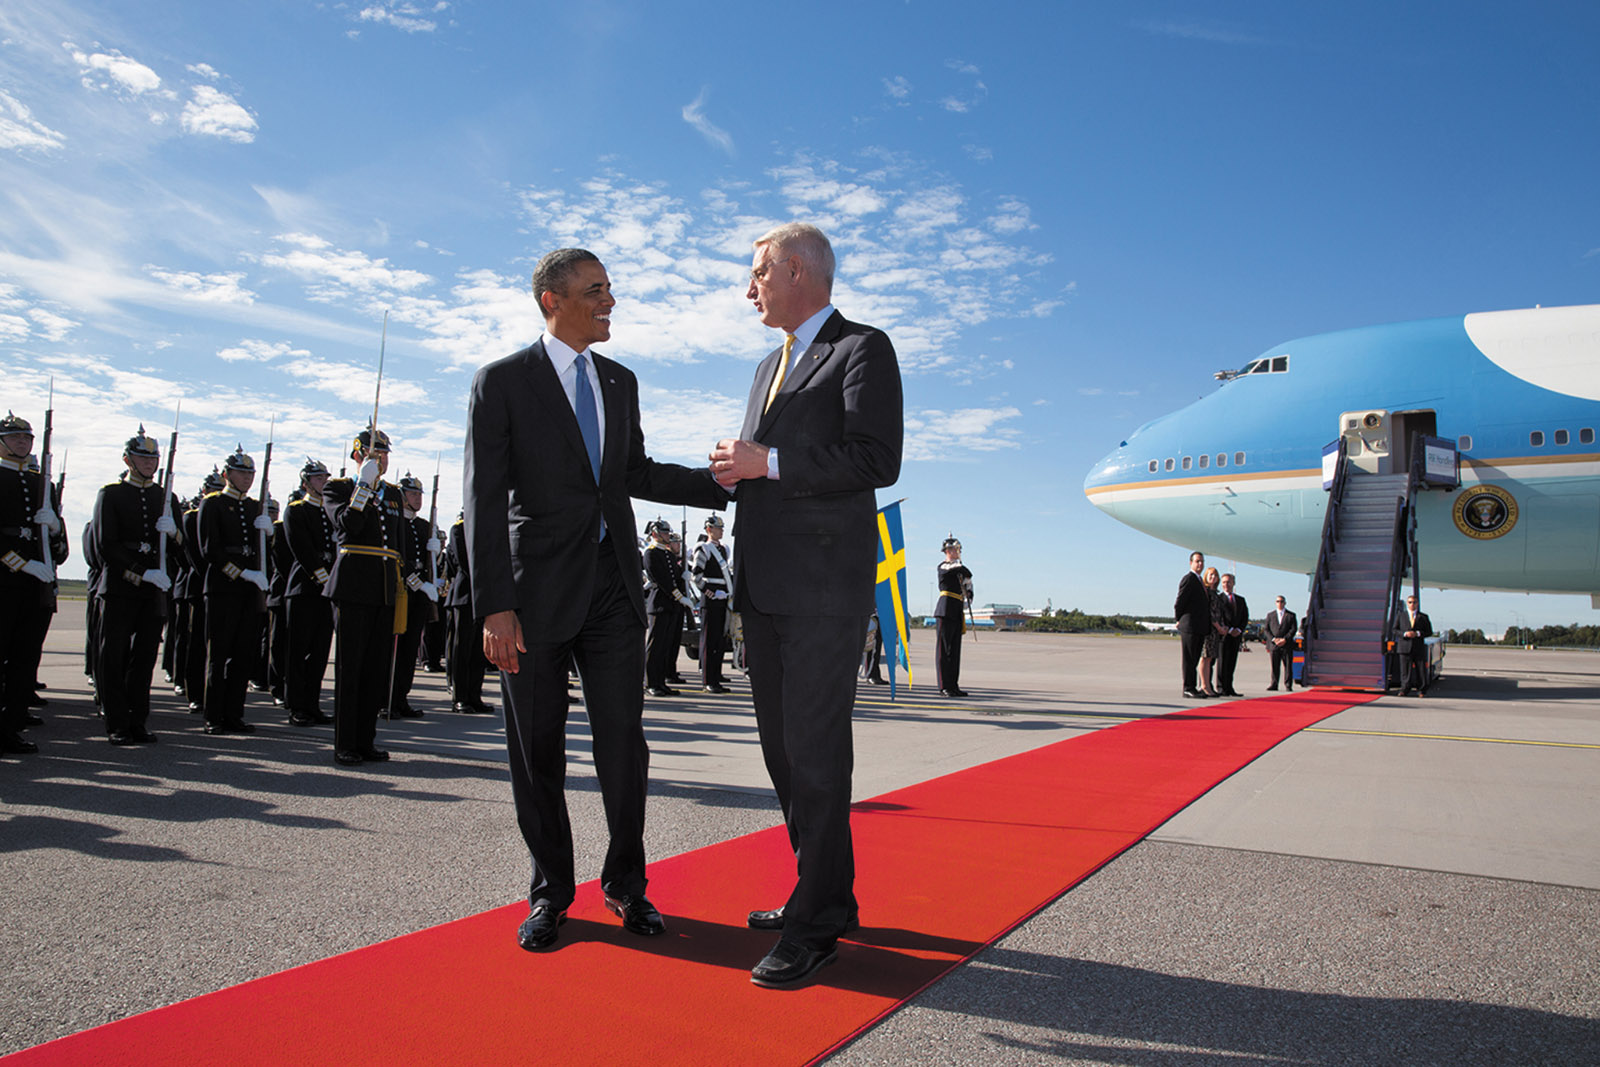 President Barack Obama with then Swedish Foreign Minister Carl Bildt at Stockholm Arlanda Airport, September 2013. At a joint press conference with then Swedish Prime Minister Fredrik Reinfeldt the same day, Obama discussed surveillance by the NSA.